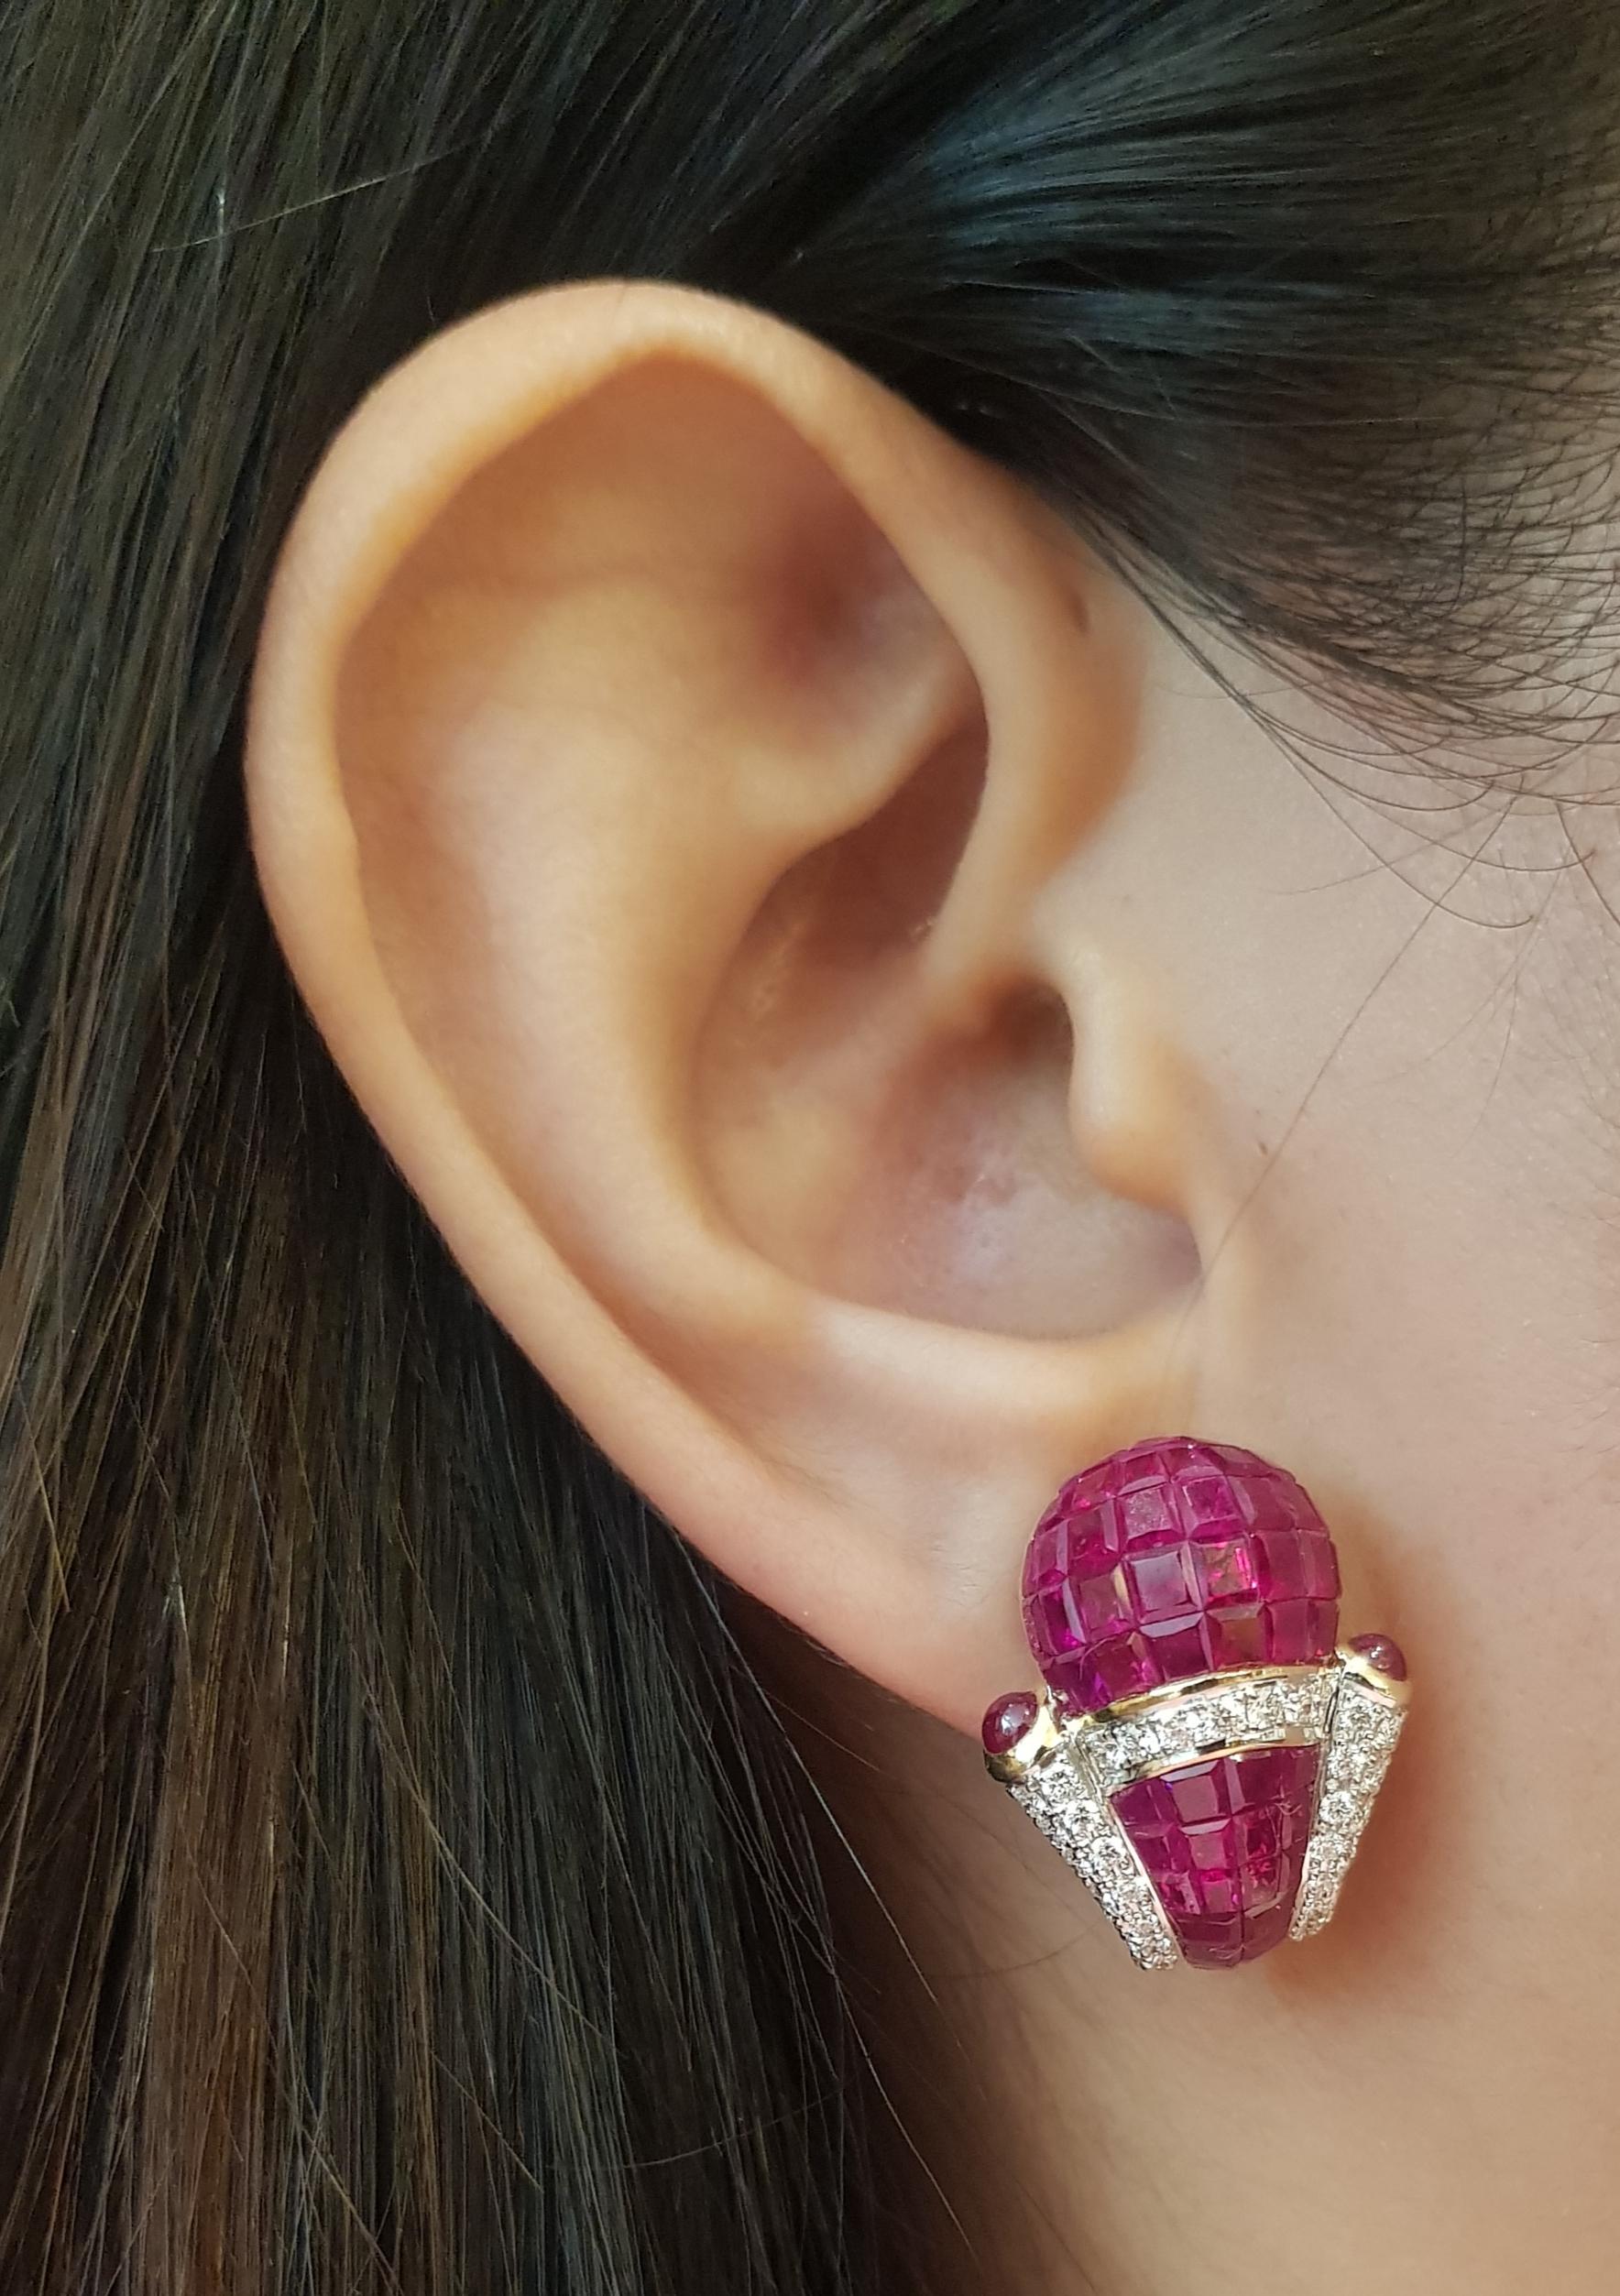 Ruby 17.19 carats, Cabochon Ruby 0.86 carat and Diamond 1.51 carats Earrings set in 18 Karat Gold Settings

Width: 1.8 cm 
Length: 2.3  cm
Total Weight: 19.58 grams

